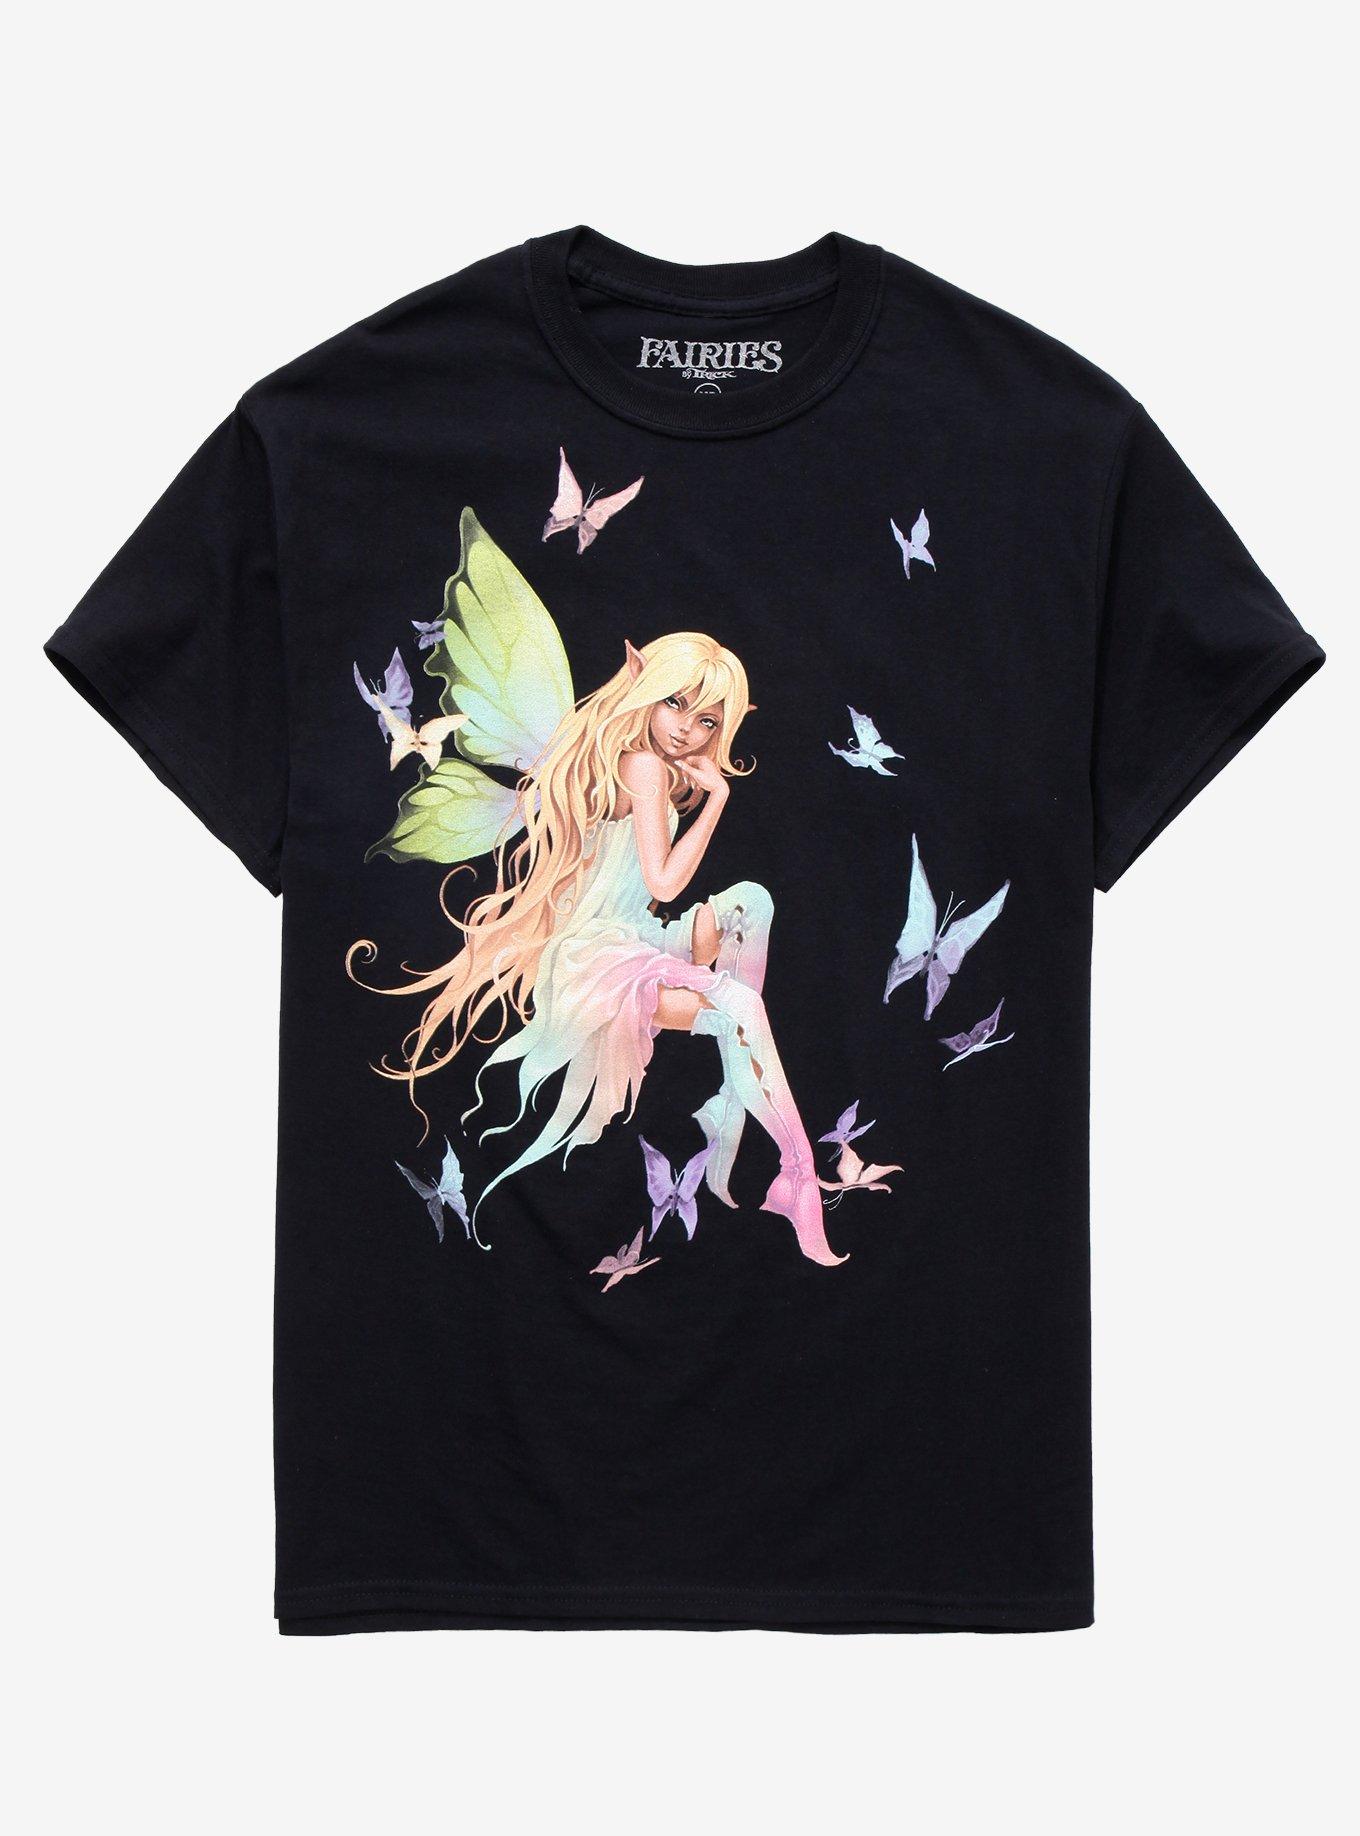 By Butterfly | Topic Fairies T-Shirt Girls Pastel Trick Hot Fairy Fit Boyfriend